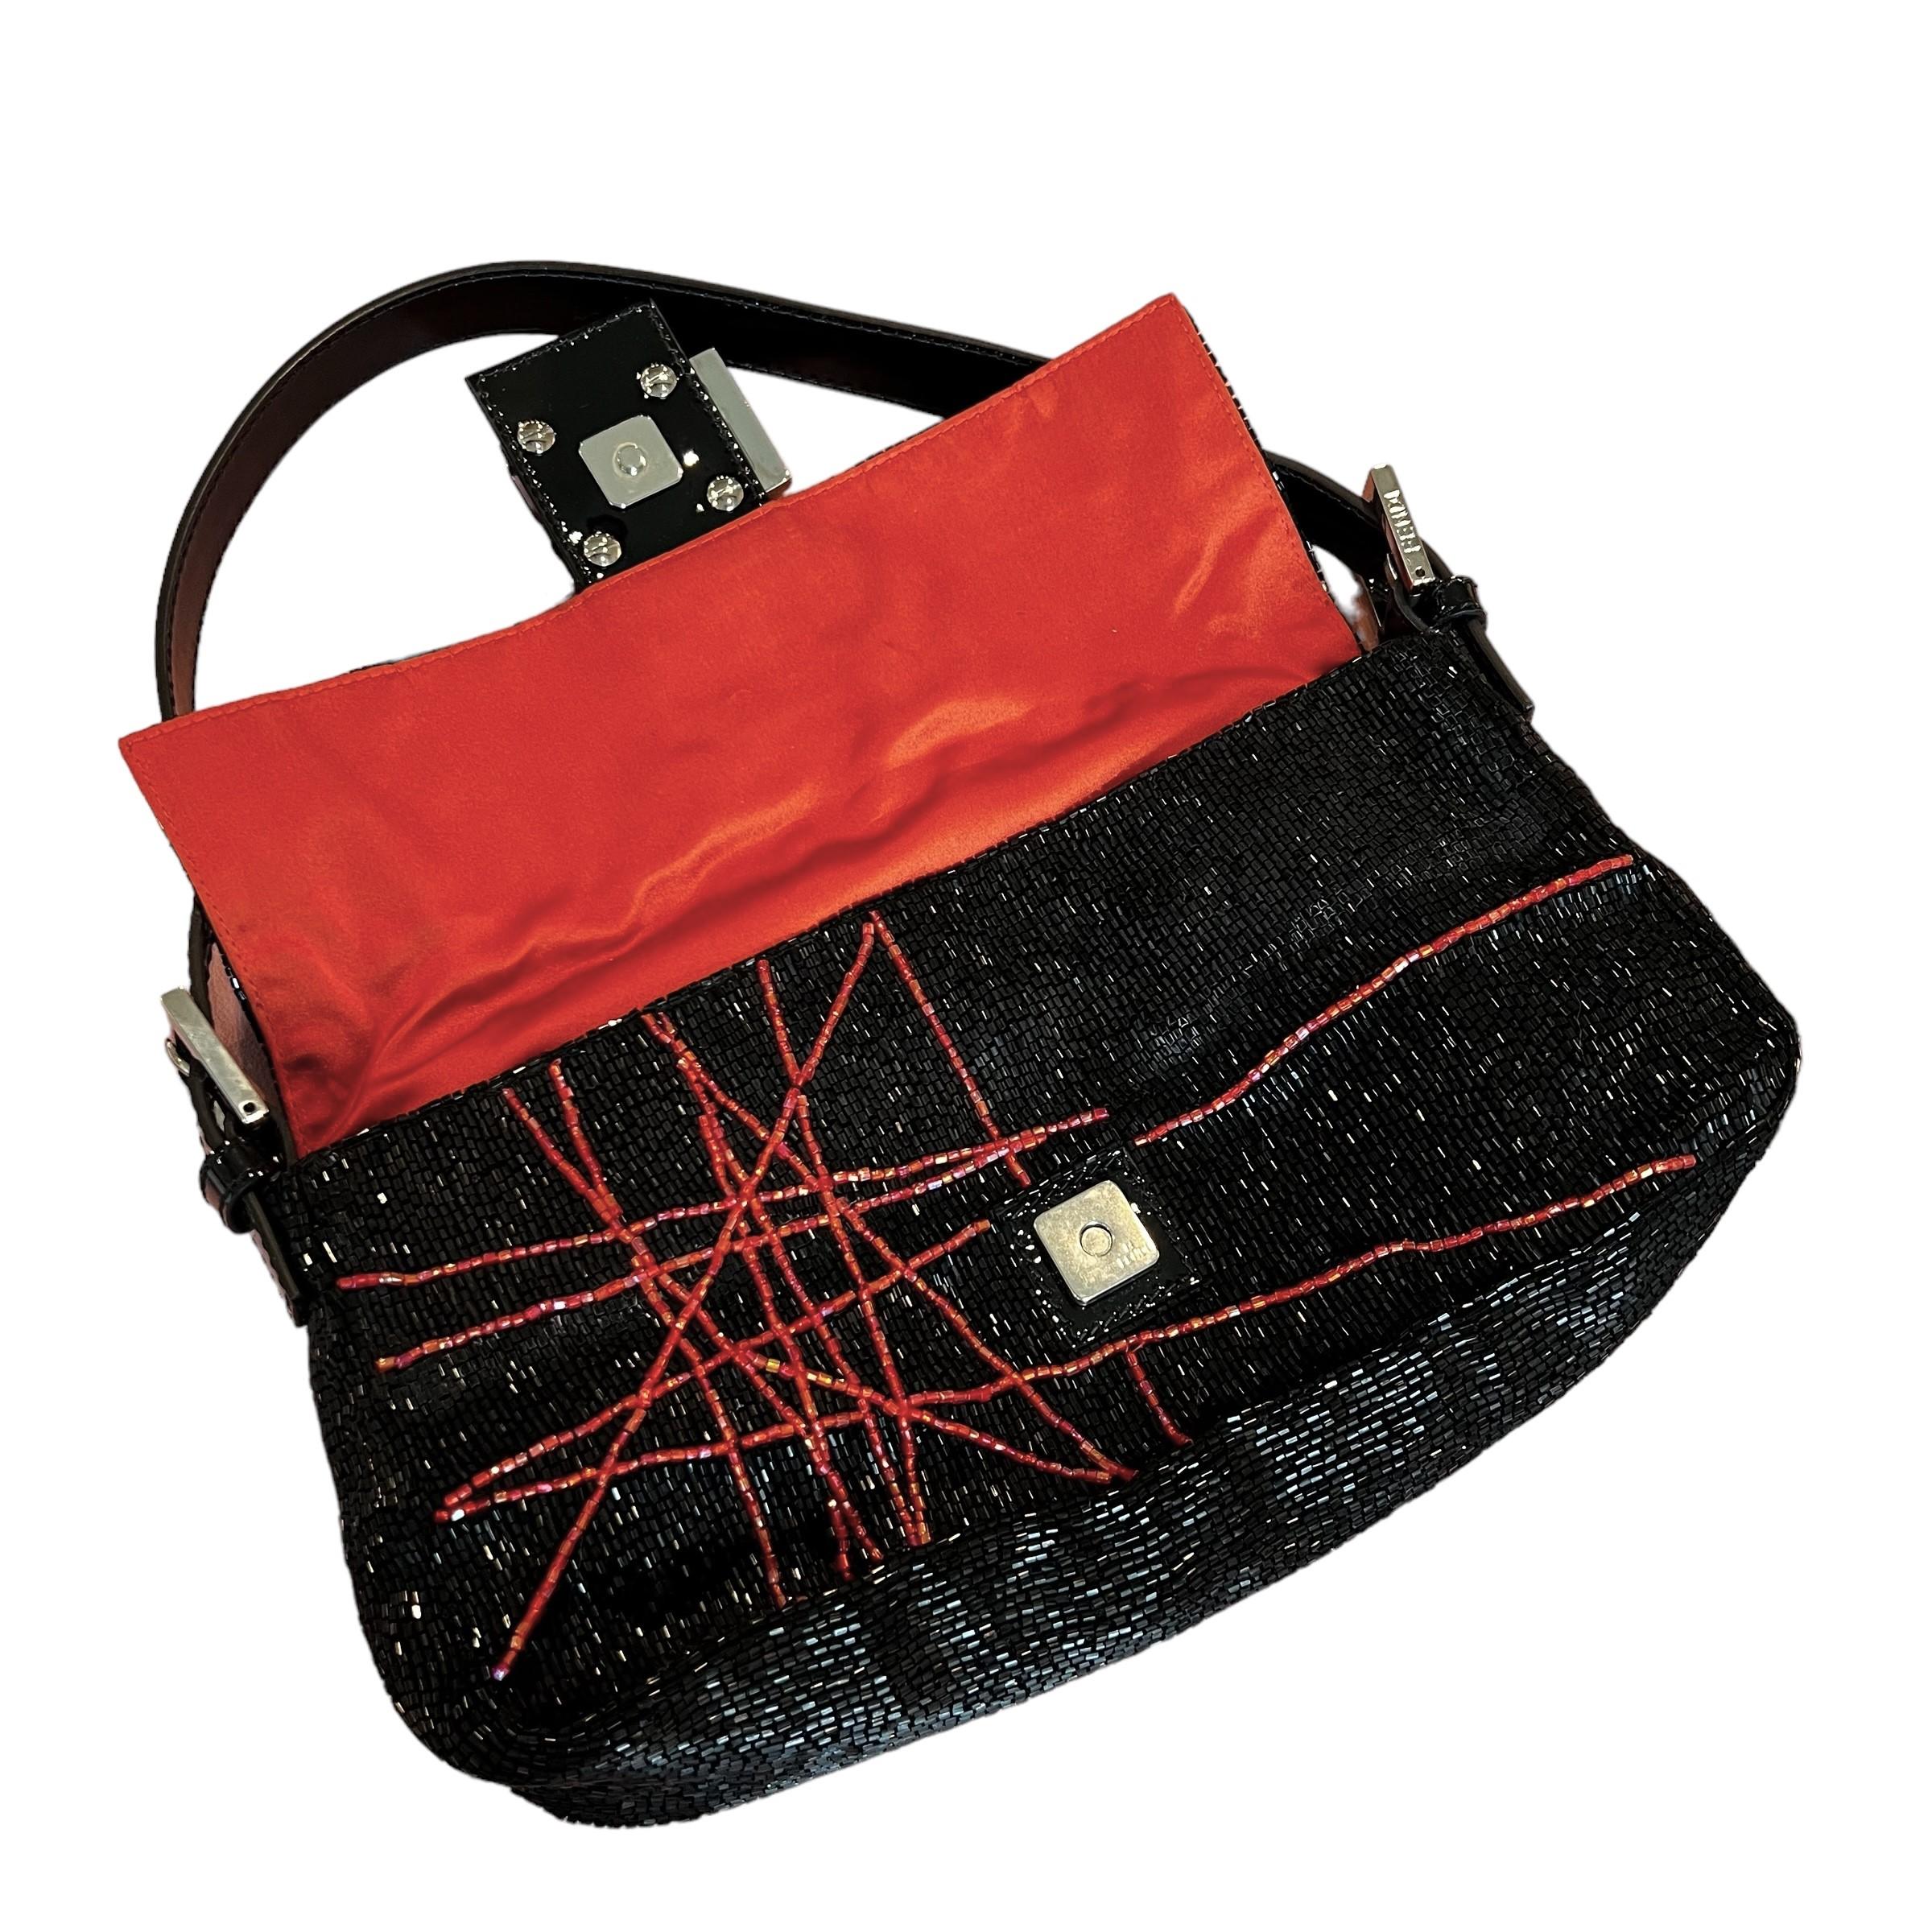 Rare Beaded Fendi Baguette Bag With Patent Leather & Swarovski Crystals For Sale 1